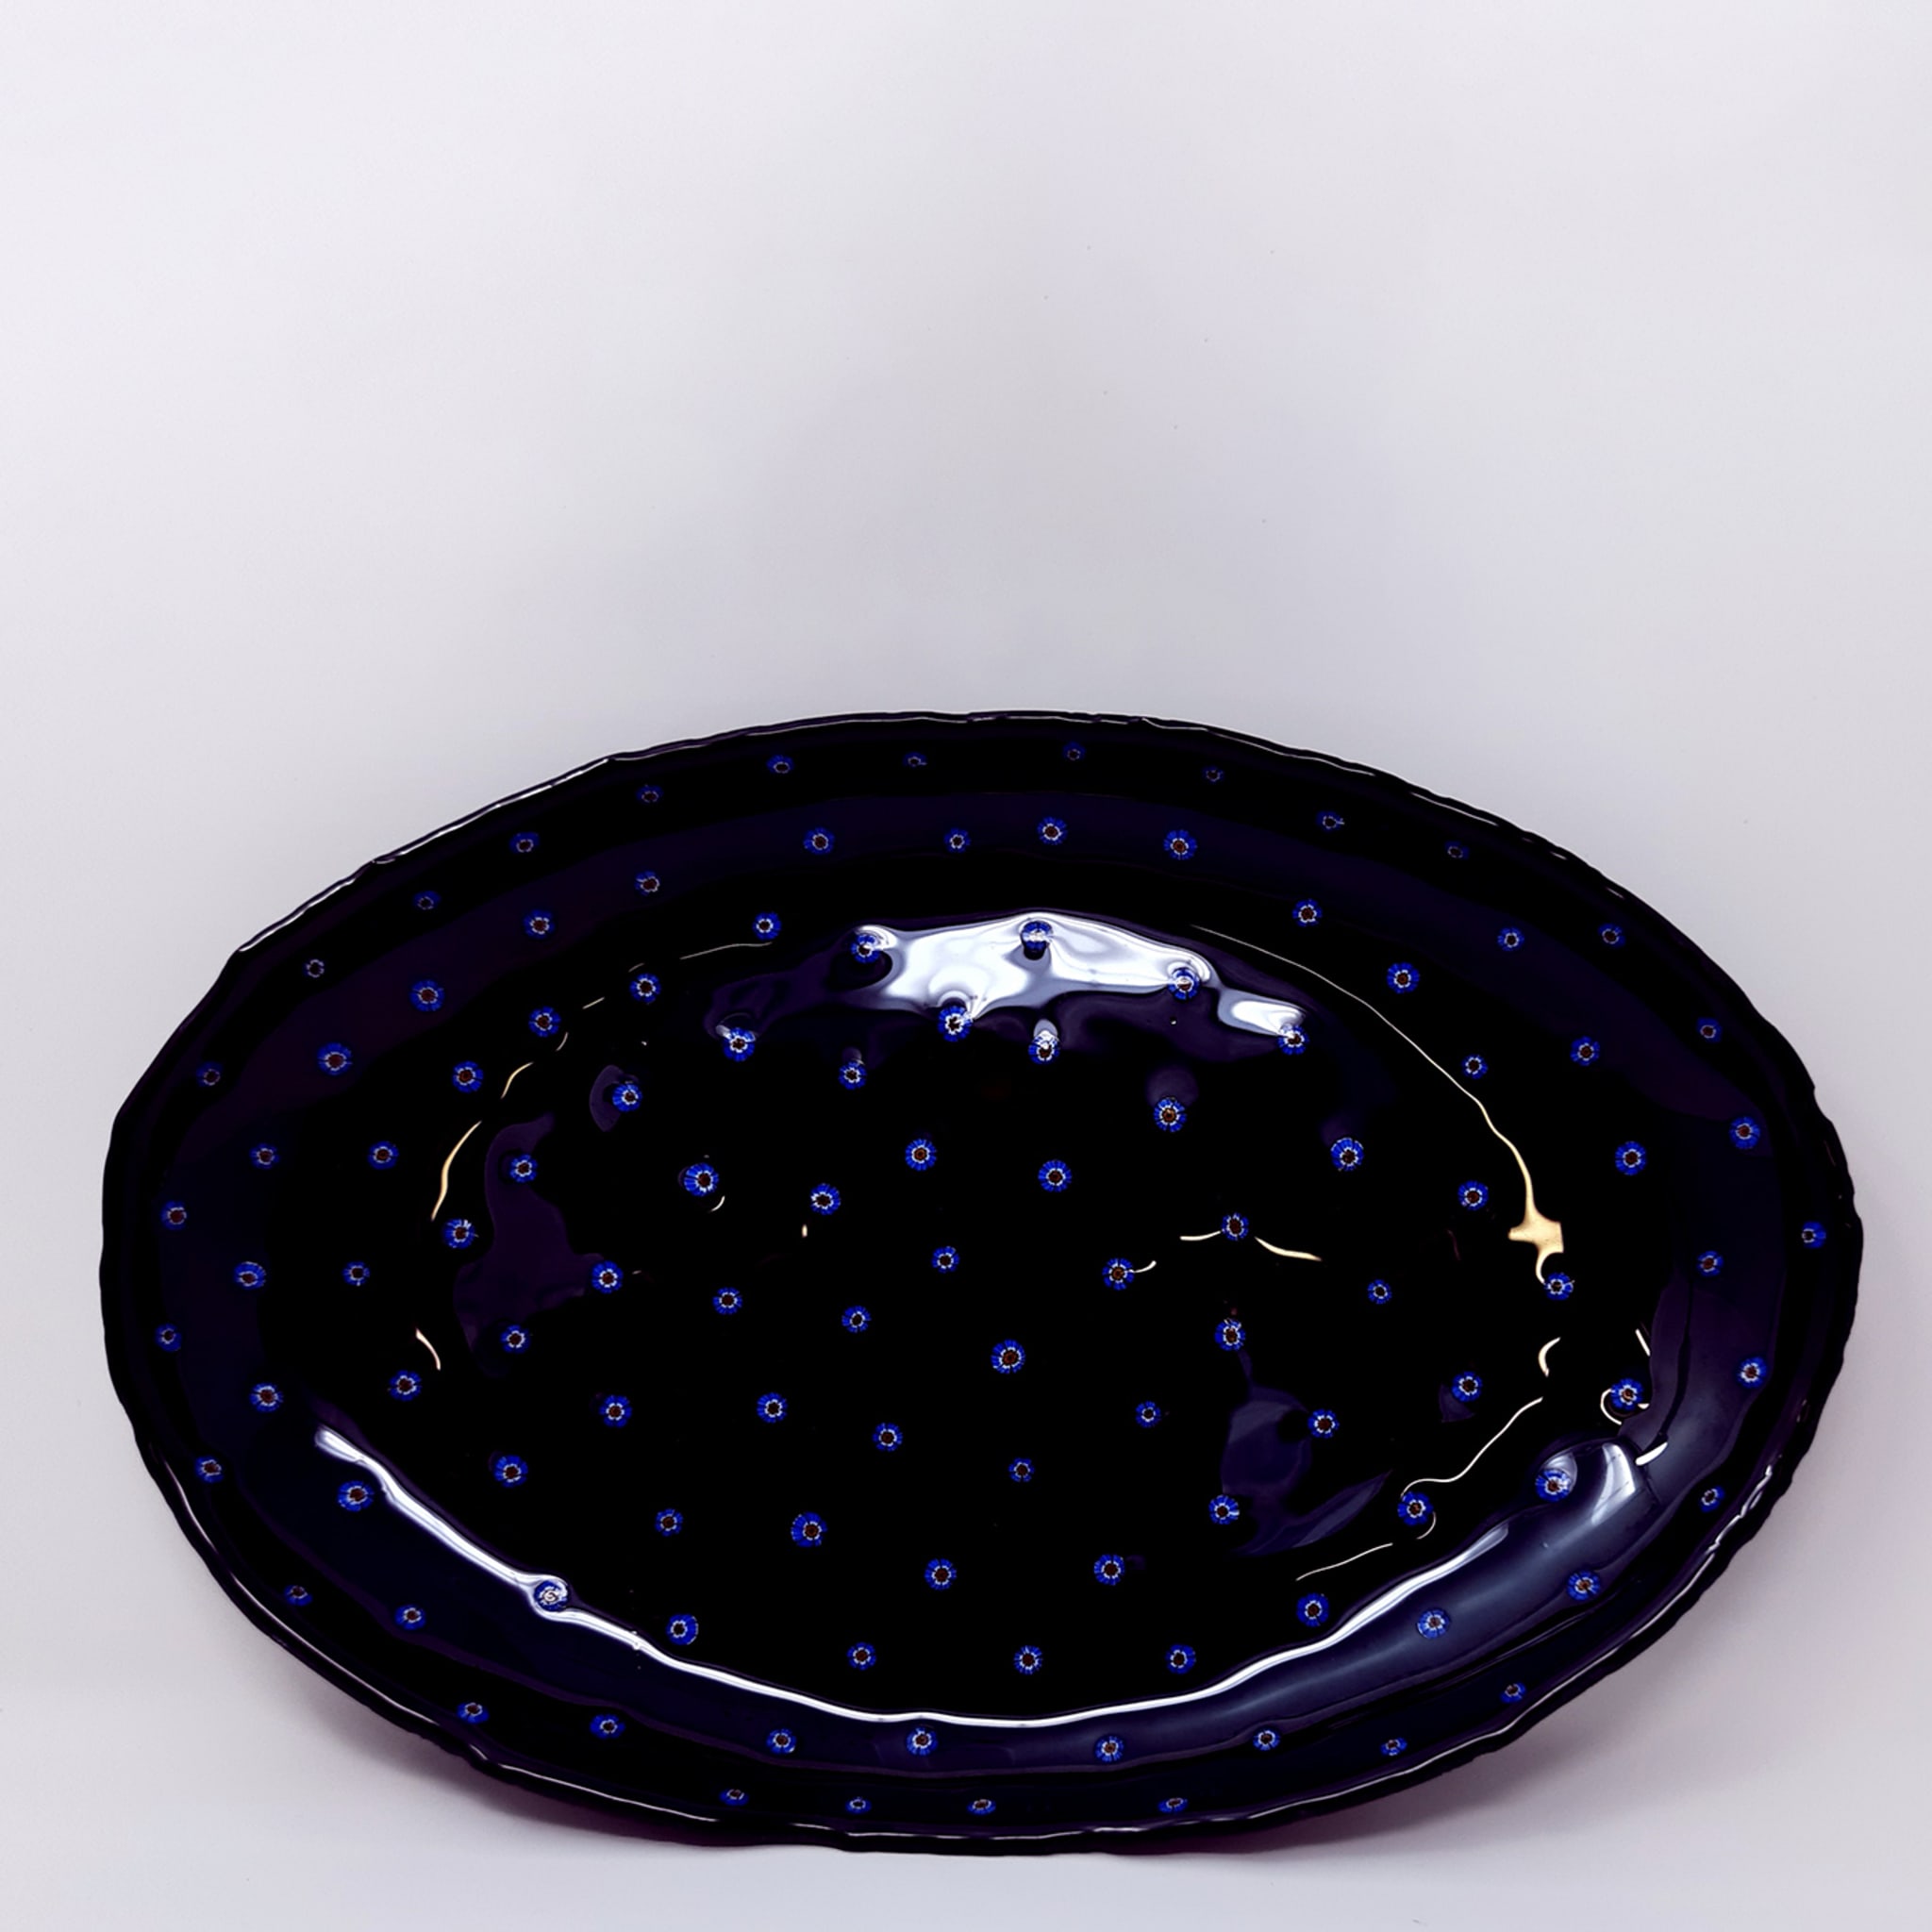 Black Glass Serving Platter with floral murrini inlays - Alternative view 1